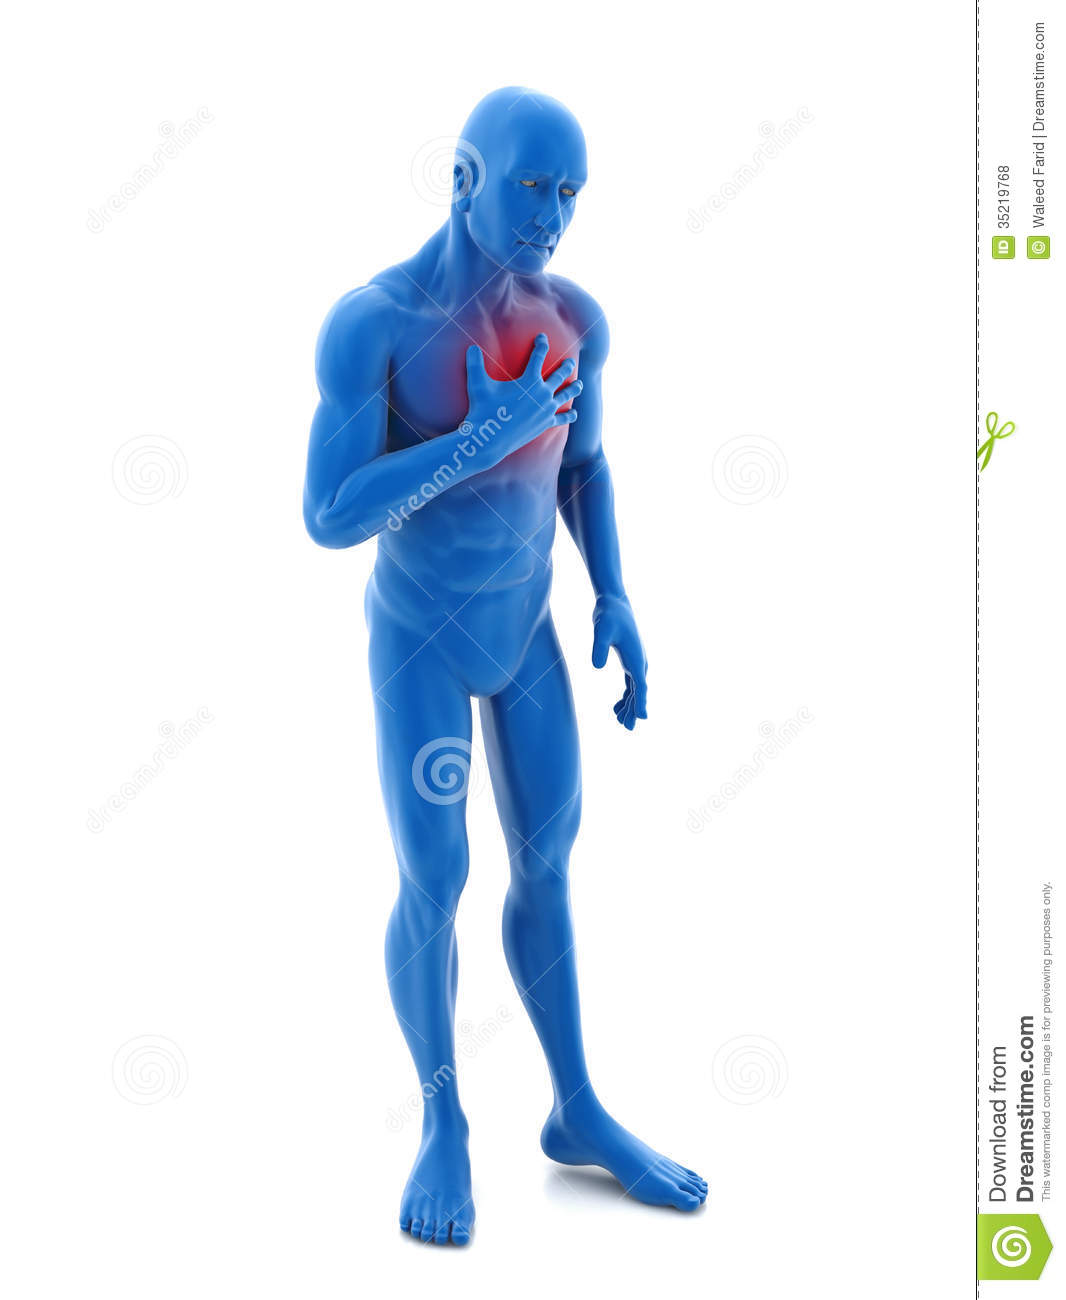 Chest Pain Royalty Free Stock Photos   Image  35219768